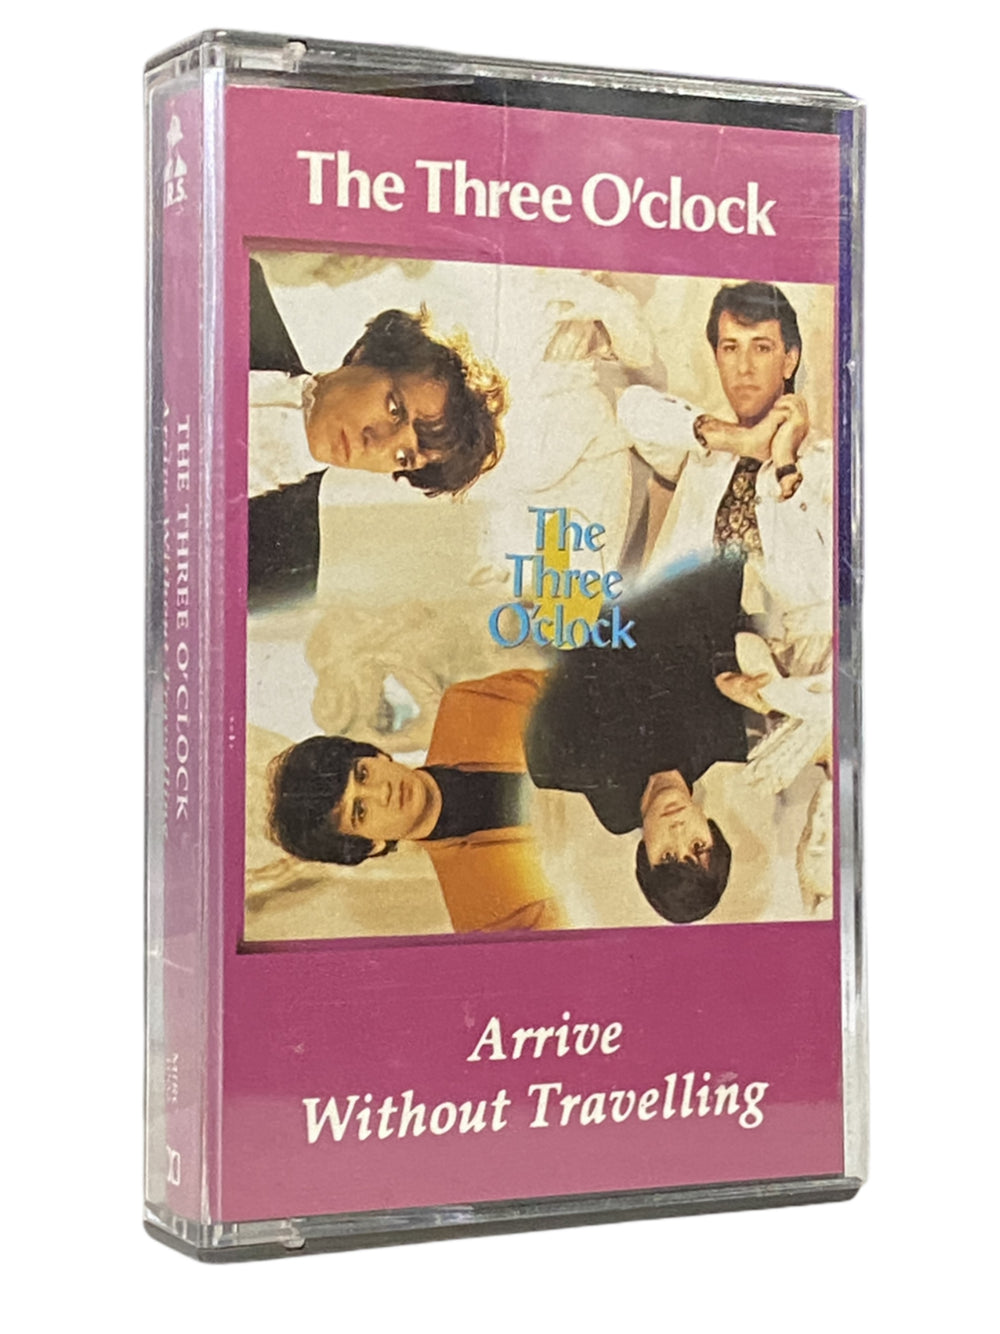 Prince – Three O'clock Arrive Without Travelling Tape Cassette Album 1985 MCA Prince